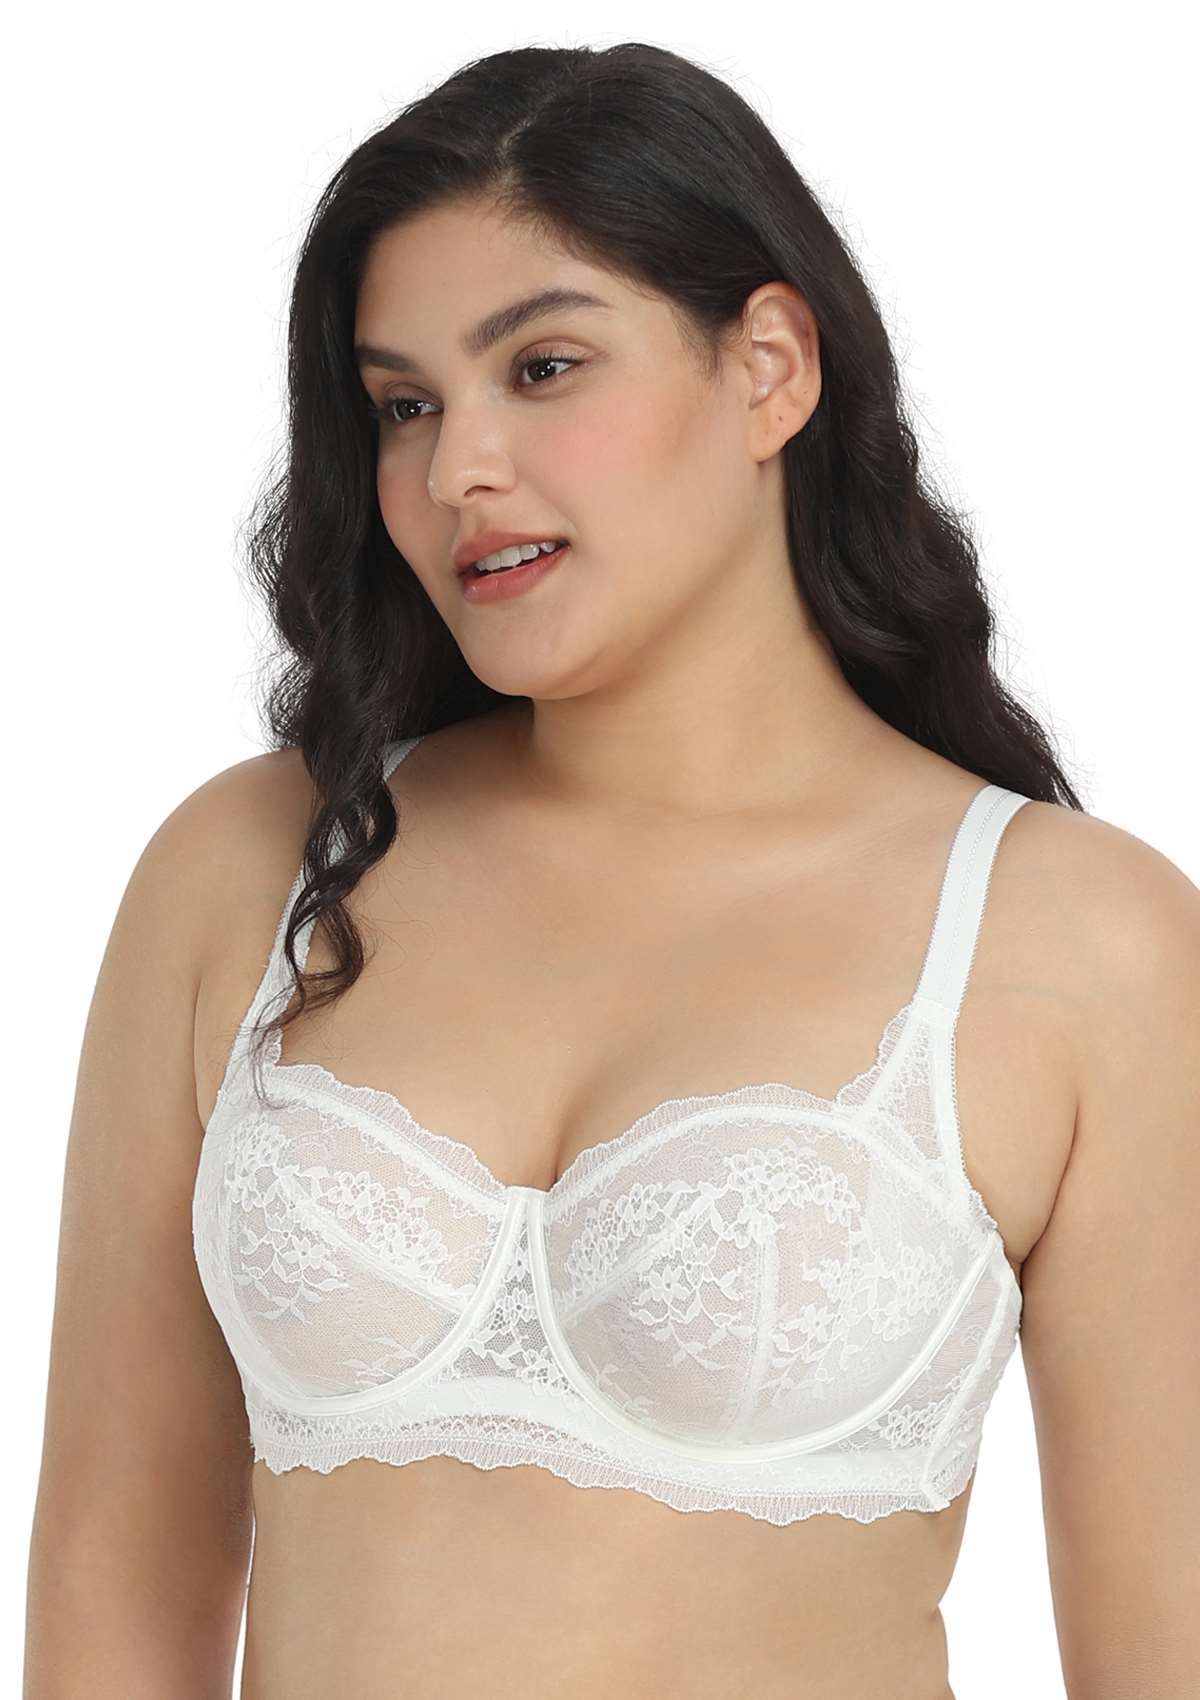 HSIA I Do Floral Lace Bridal Balconette Beautiful Bra For Special Day - White / 36 / D